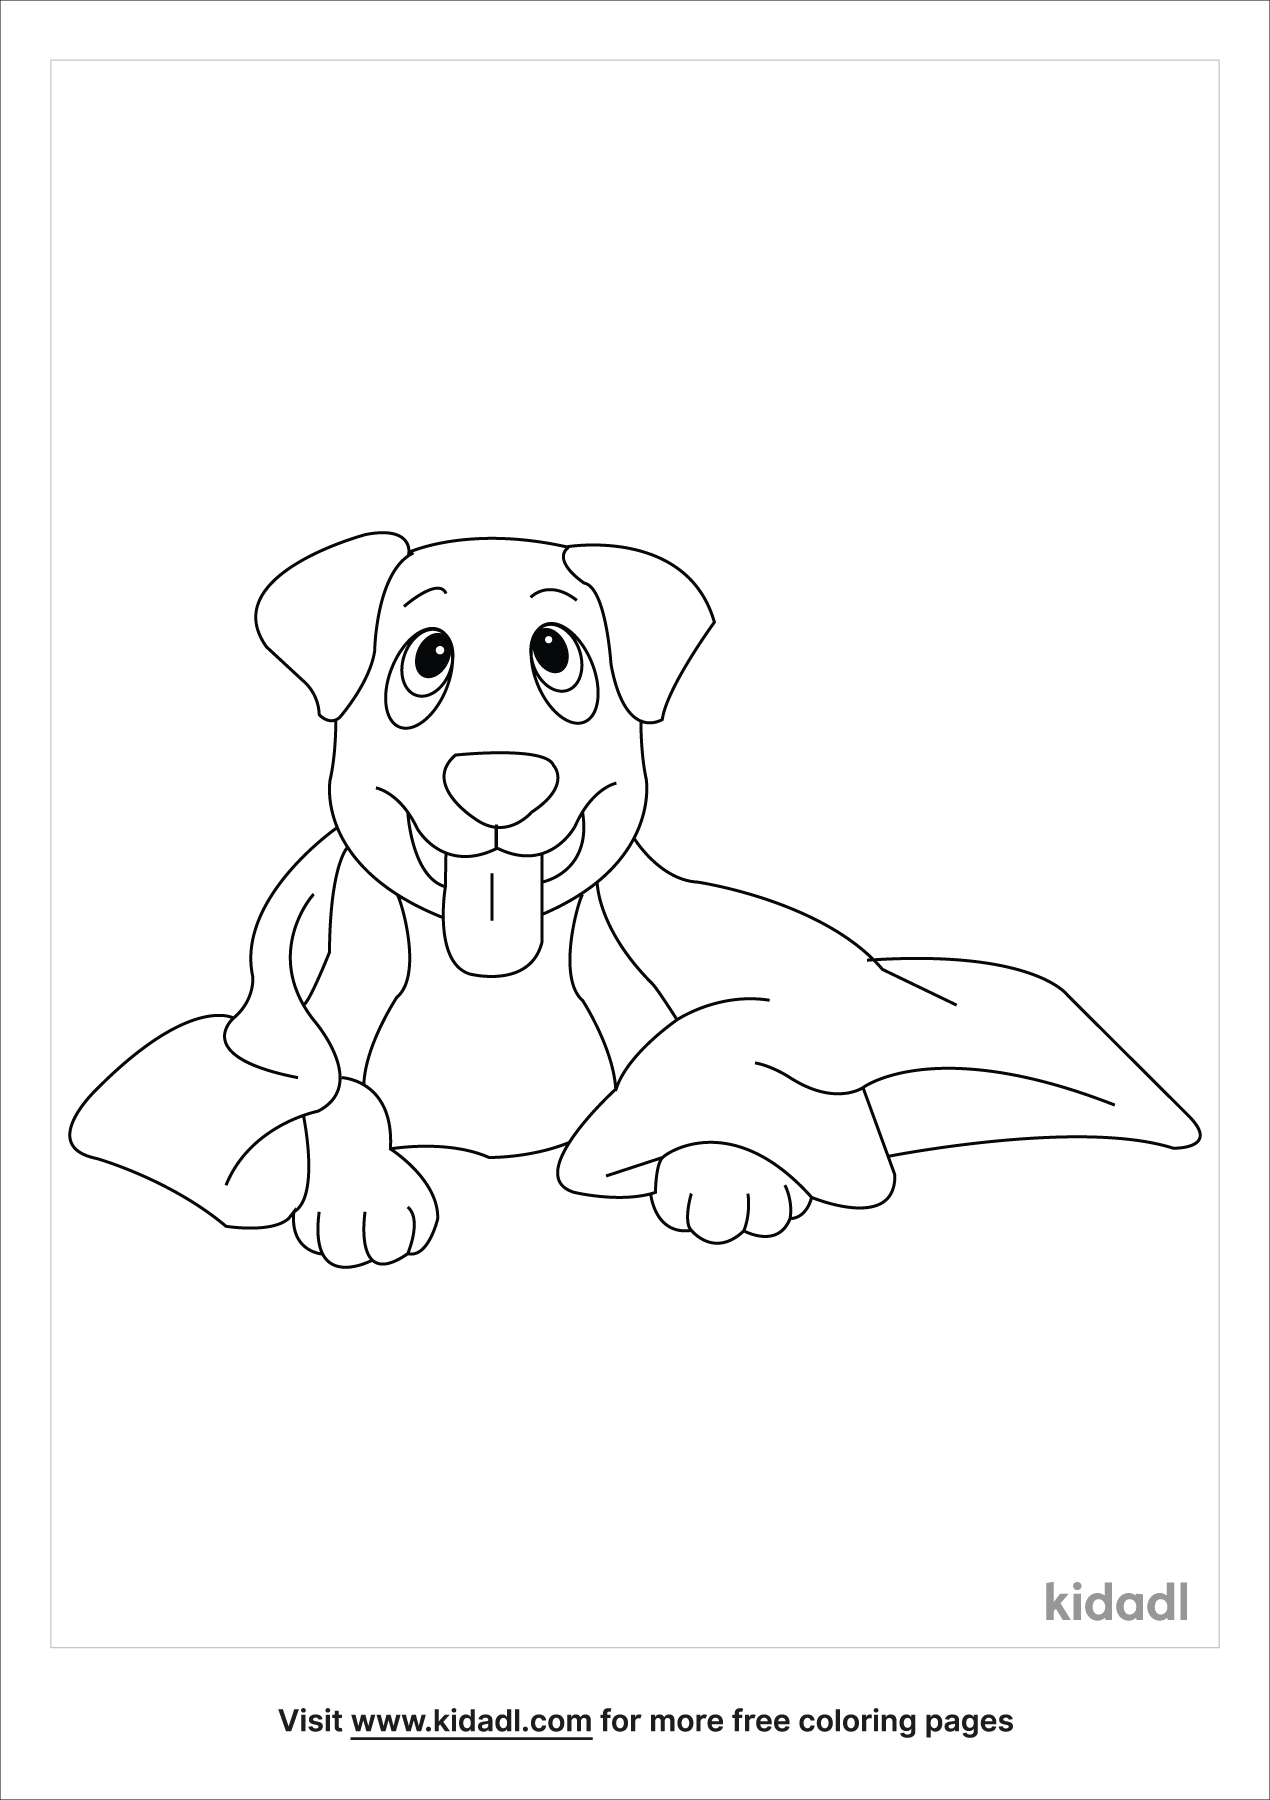 Puppy Under A Blanket Coloring Pages | Free Animals Coloring Pages | Kidadl